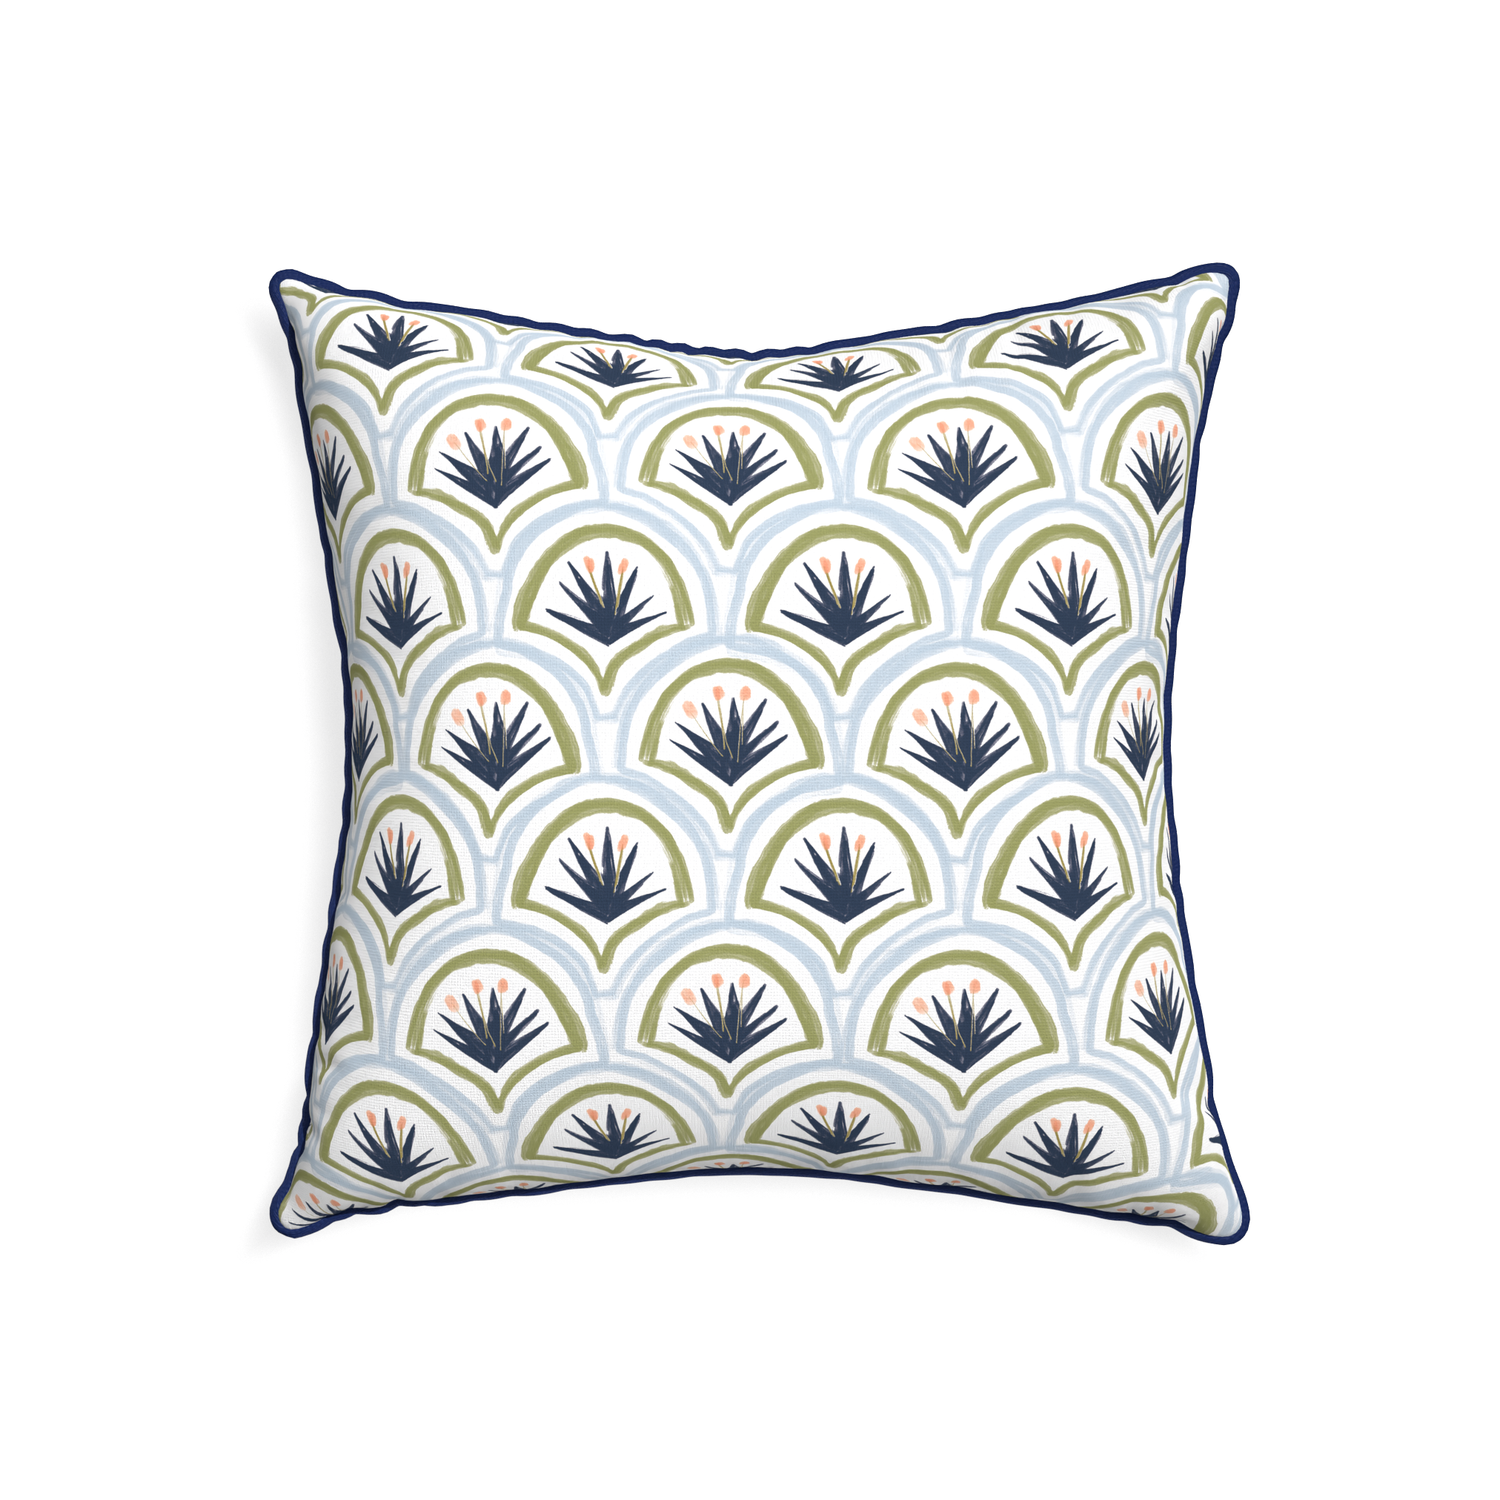 22-square thatcher midnight custom art deco palm patternpillow with midnight piping on white background